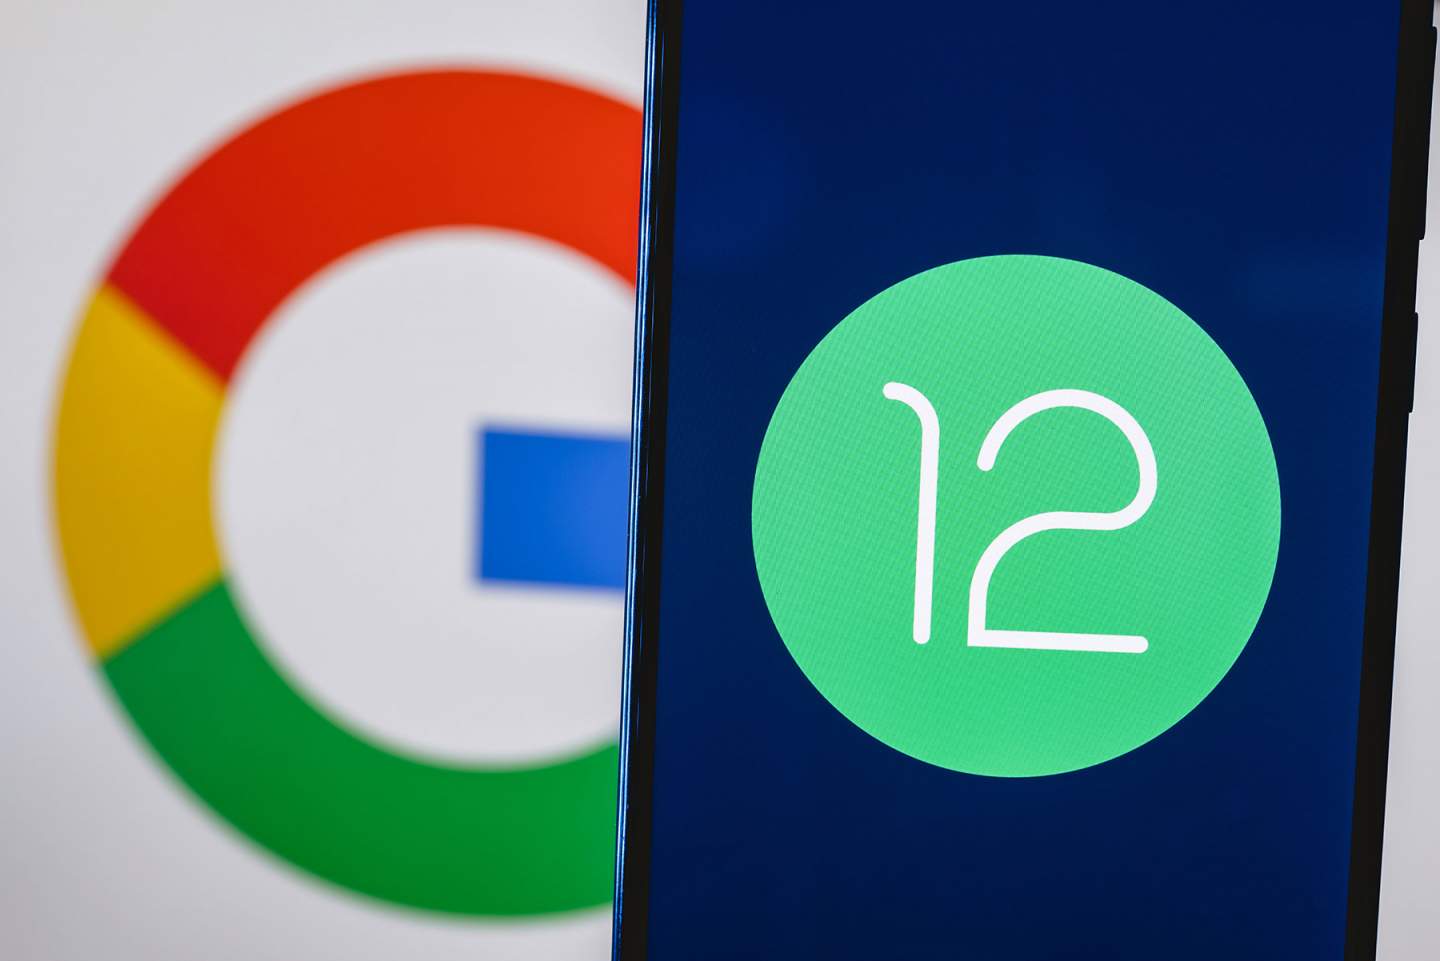 Google logo with Android 12